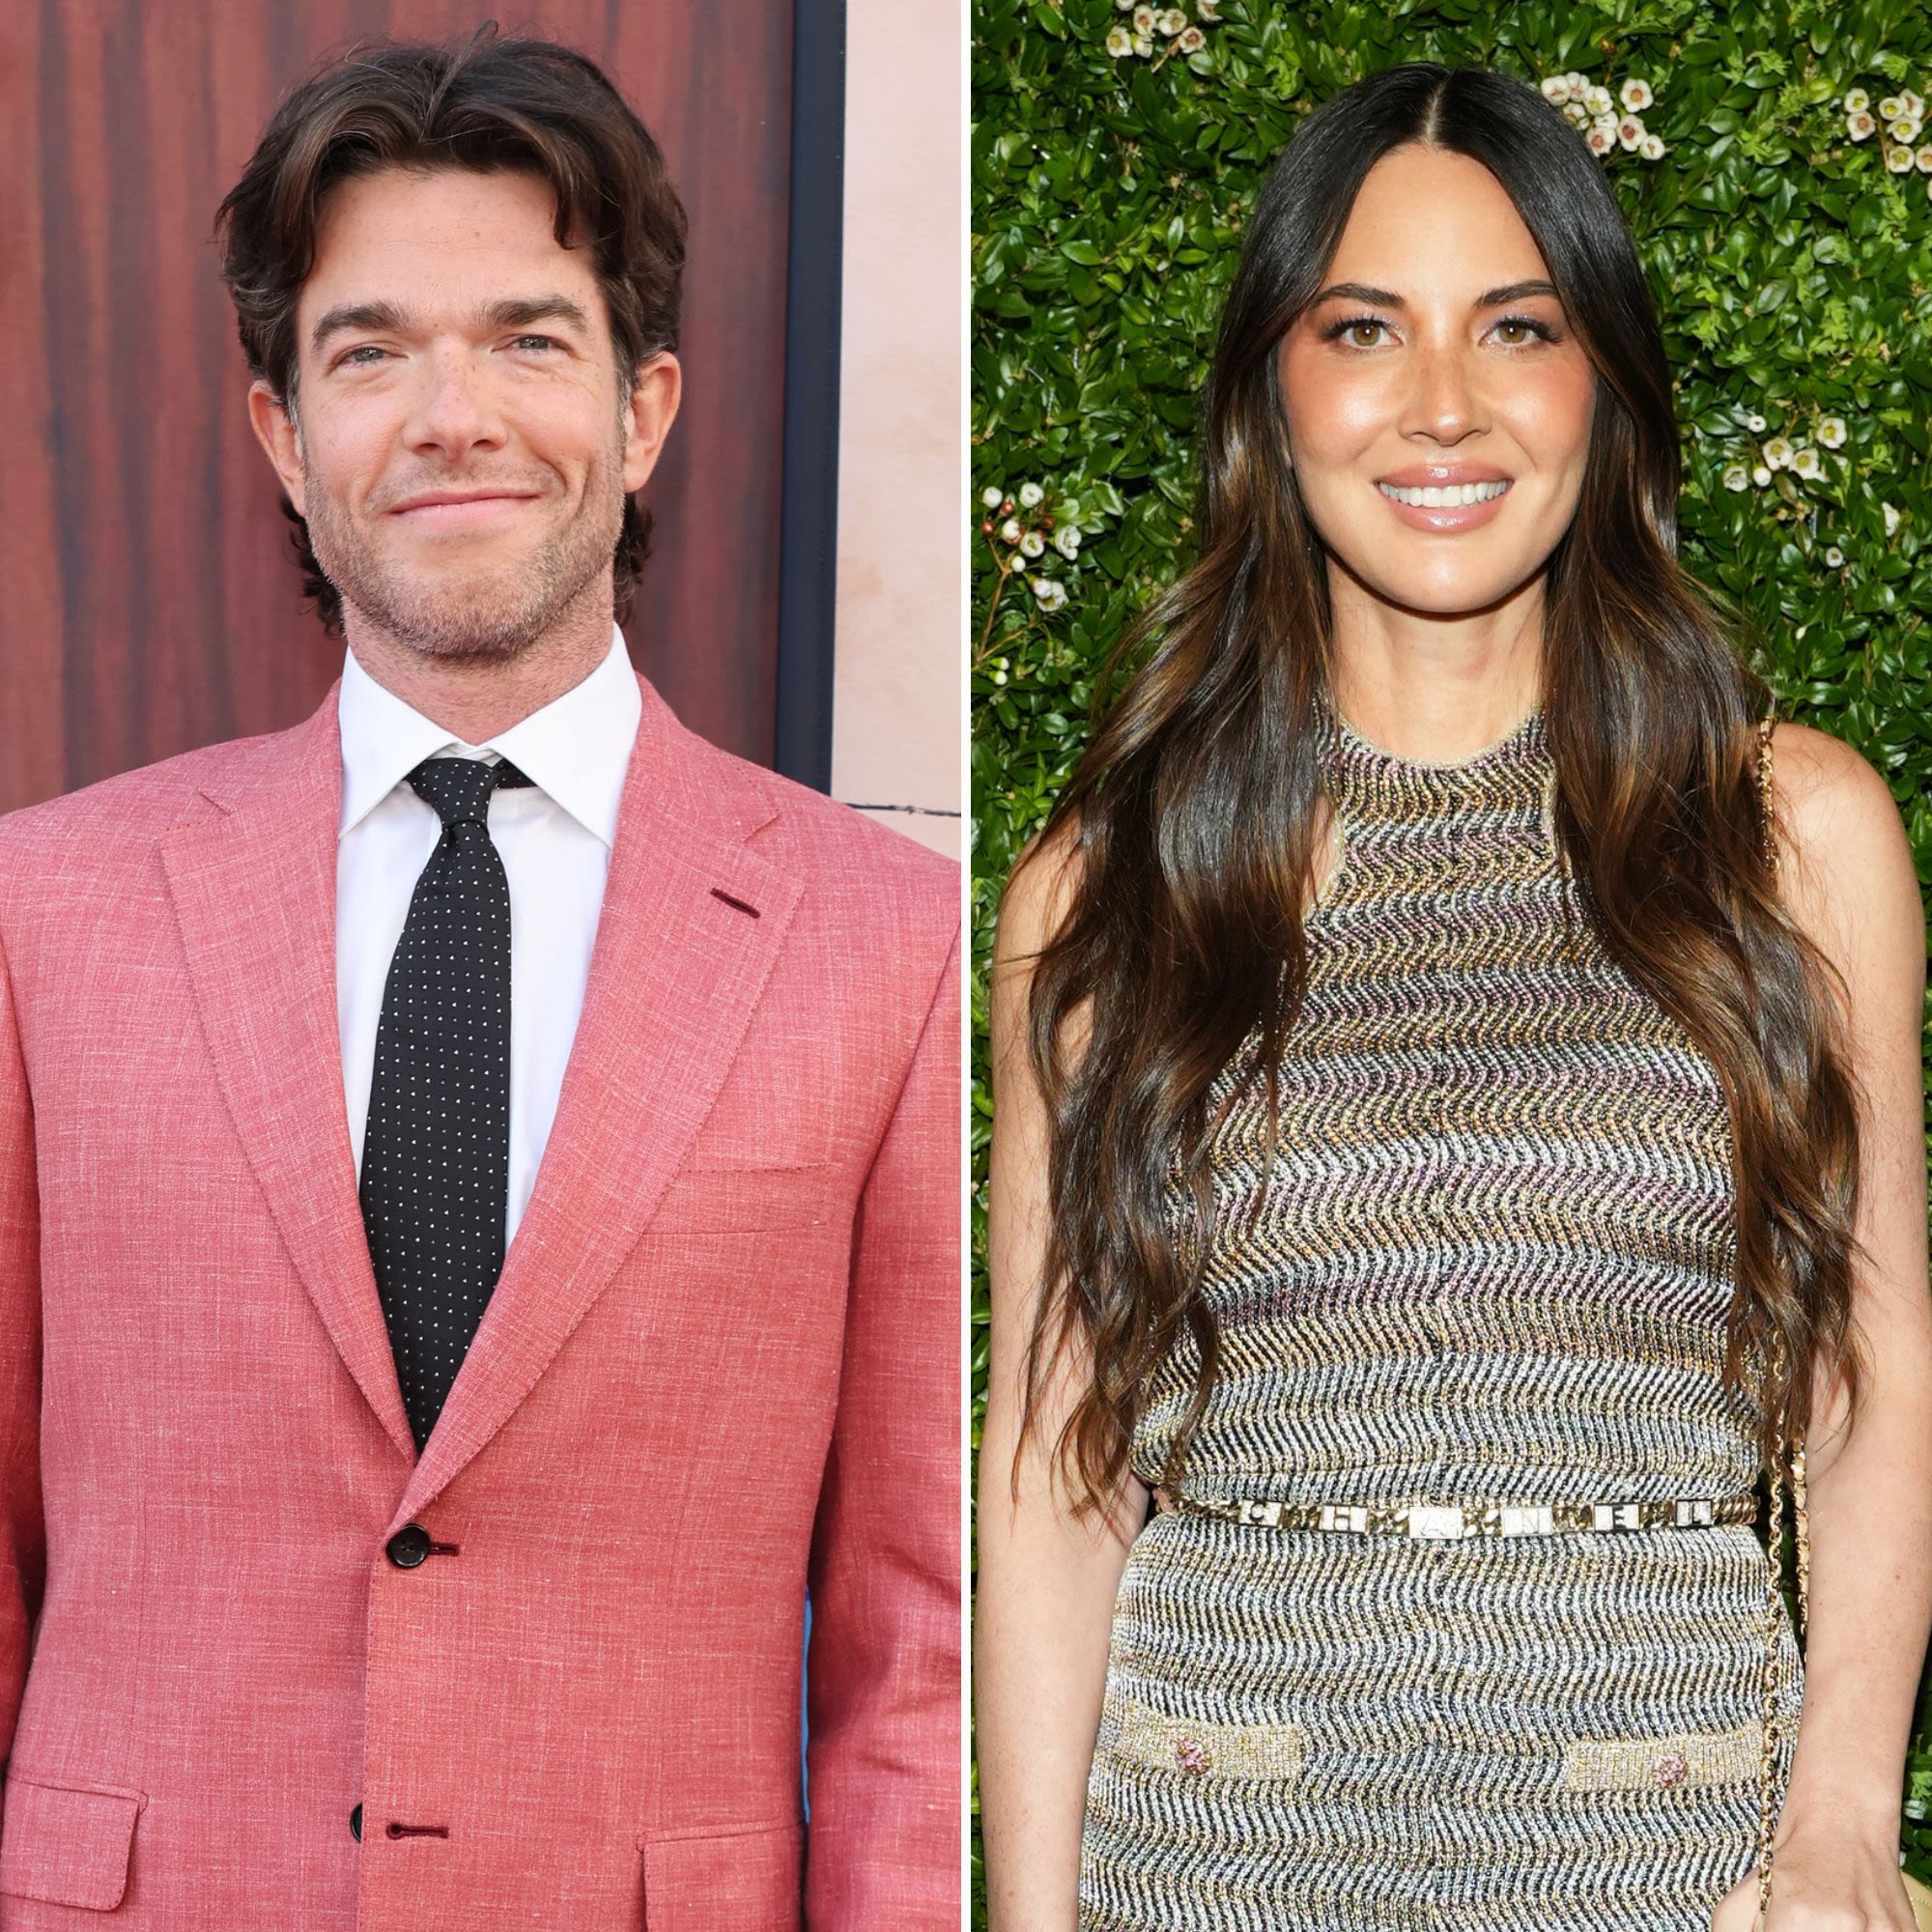 Olivia Munn and John Mulaney Are Married After Intimate and Private Ceremony in New York